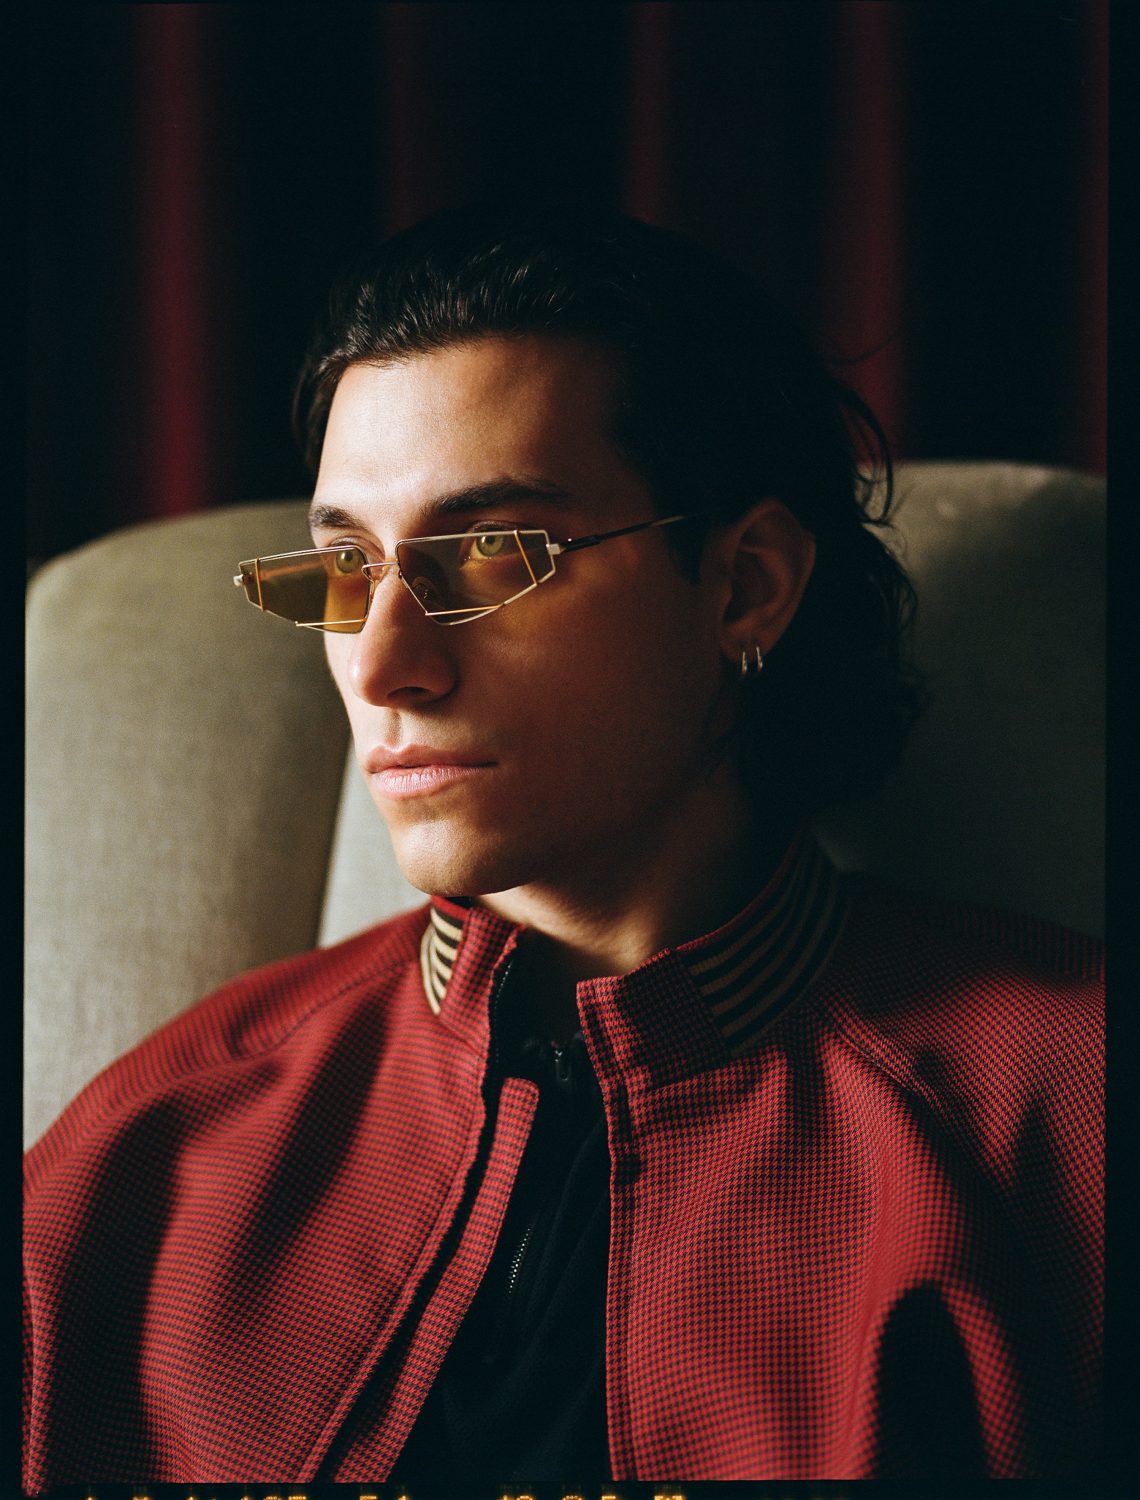 Rob Raco on how Fendi's new men's eyewear can up your summer style